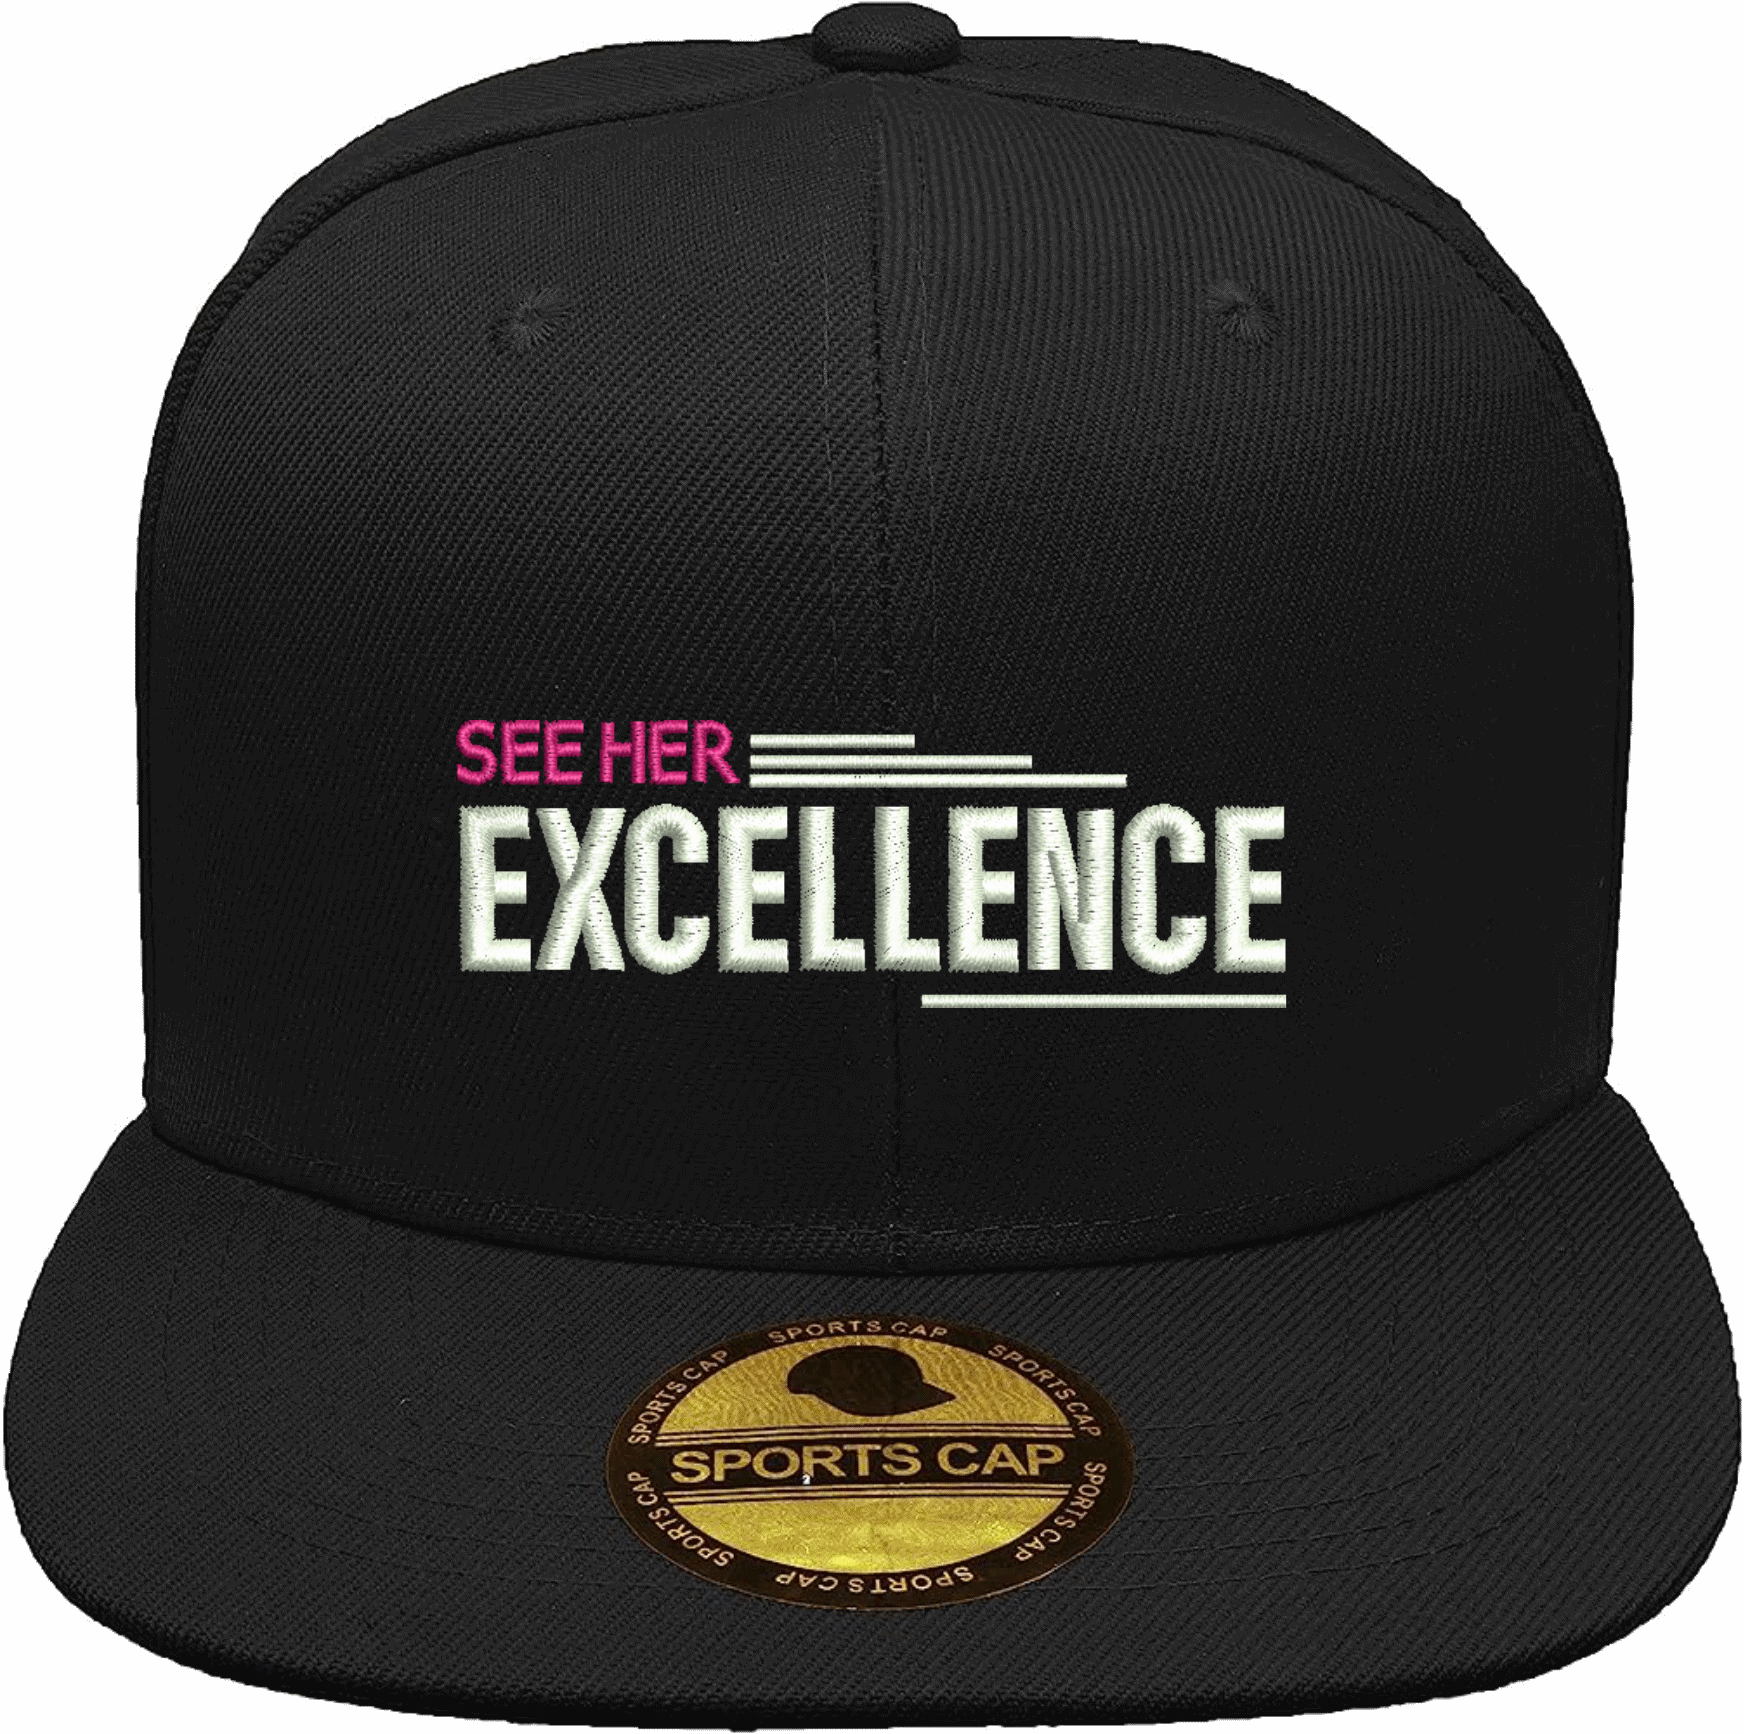 S.H.E. (See Her Excellence) Cap